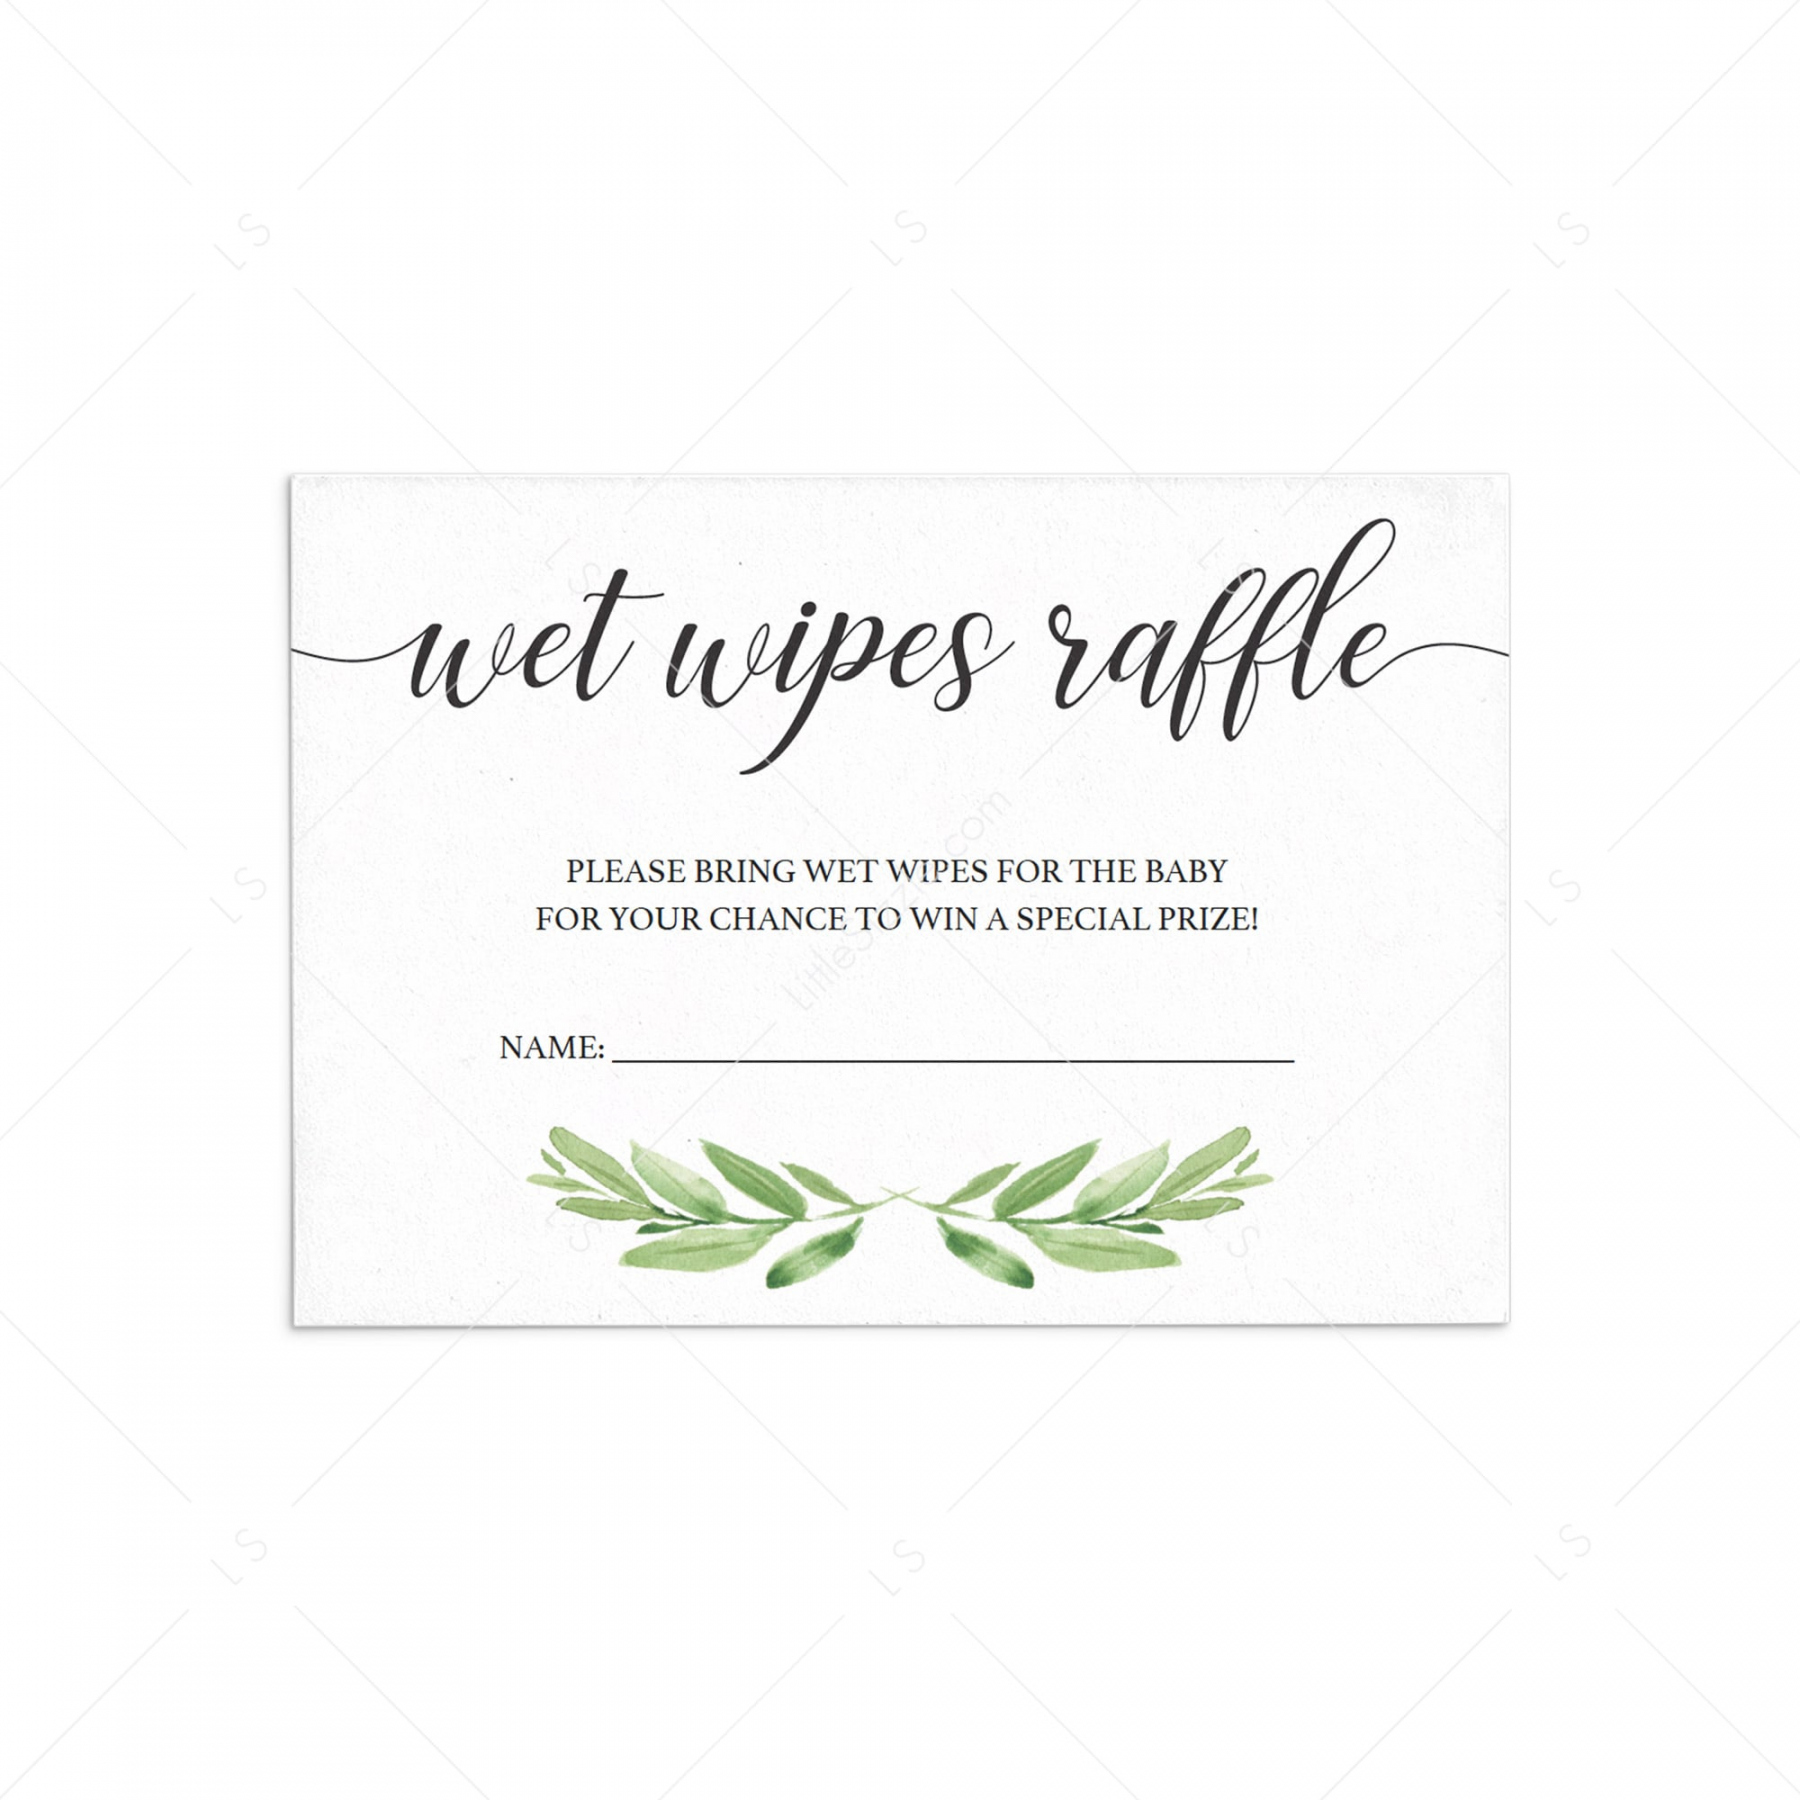 Wet Wipes Raffle Ticket printable for Baby Shower  Instant download - FREE Printables - Free Printable Diaper And Wipe Raffle